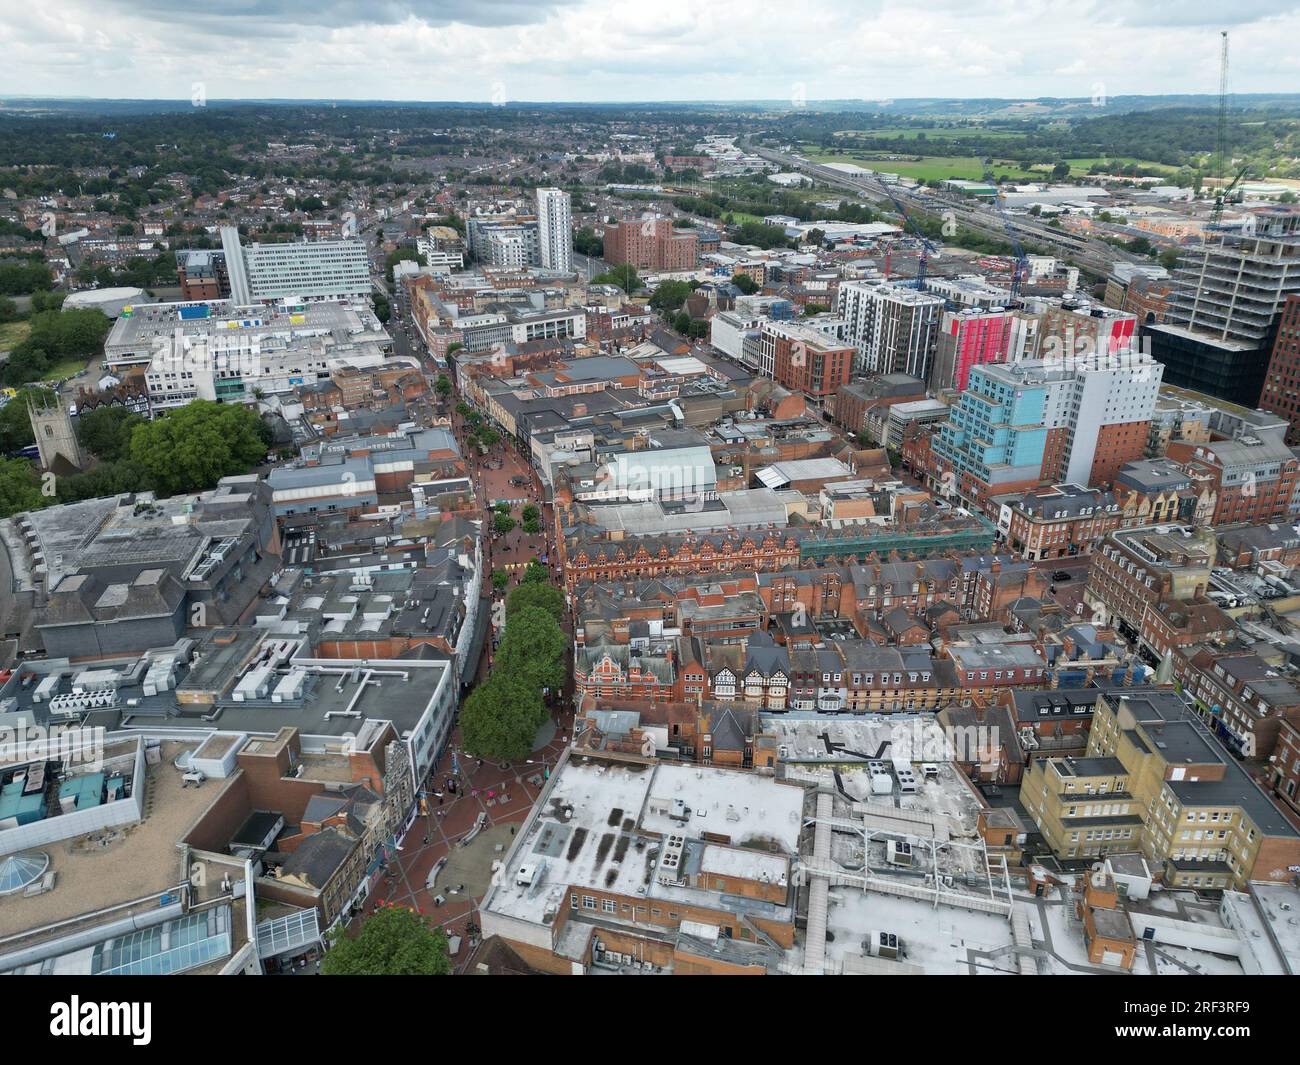 Reading town centre shops and housing Berkshire UK drone, aerial Stock Photo